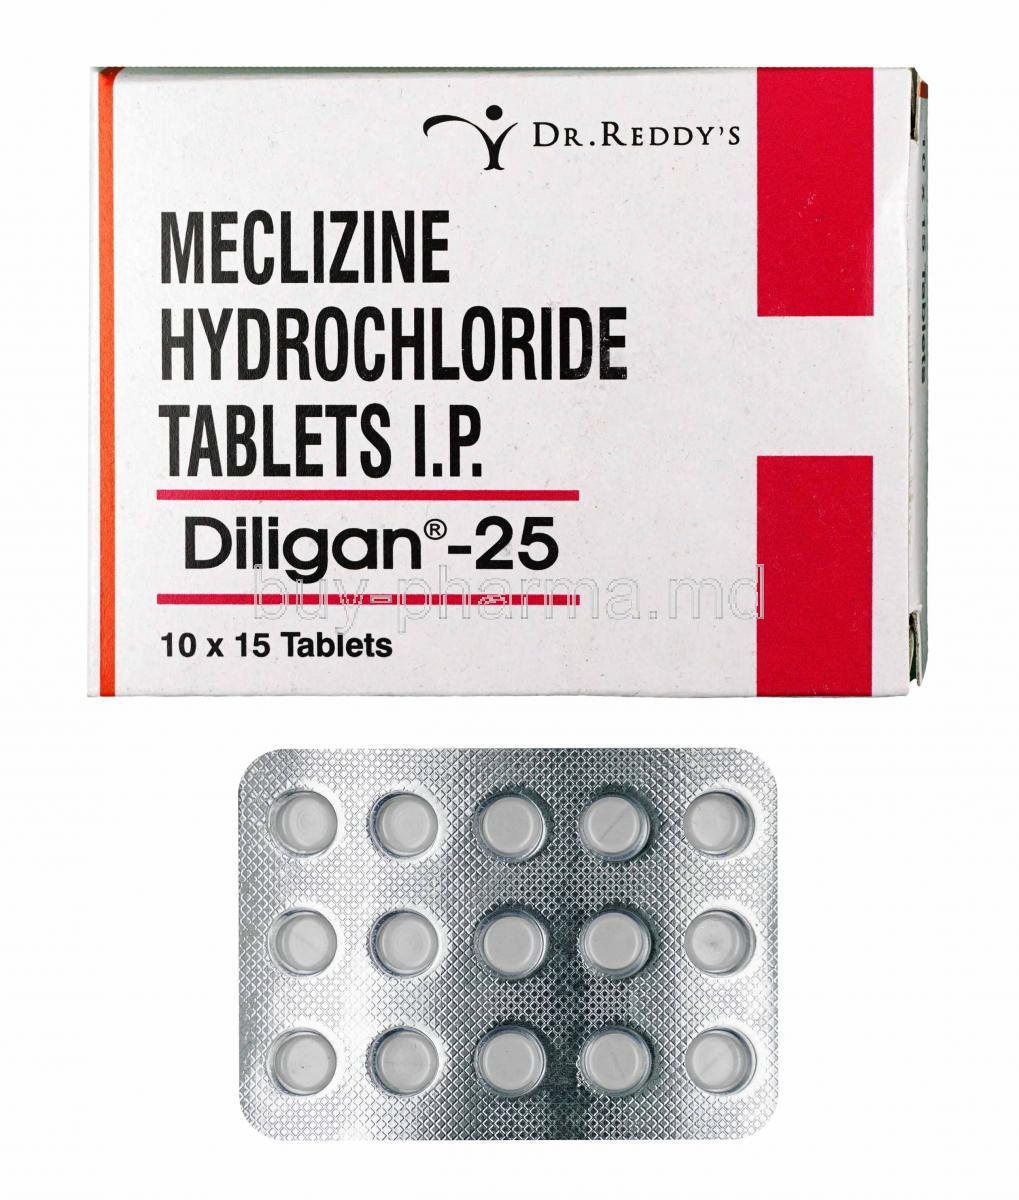 Diligan, Meclizine 25mg box and tablets